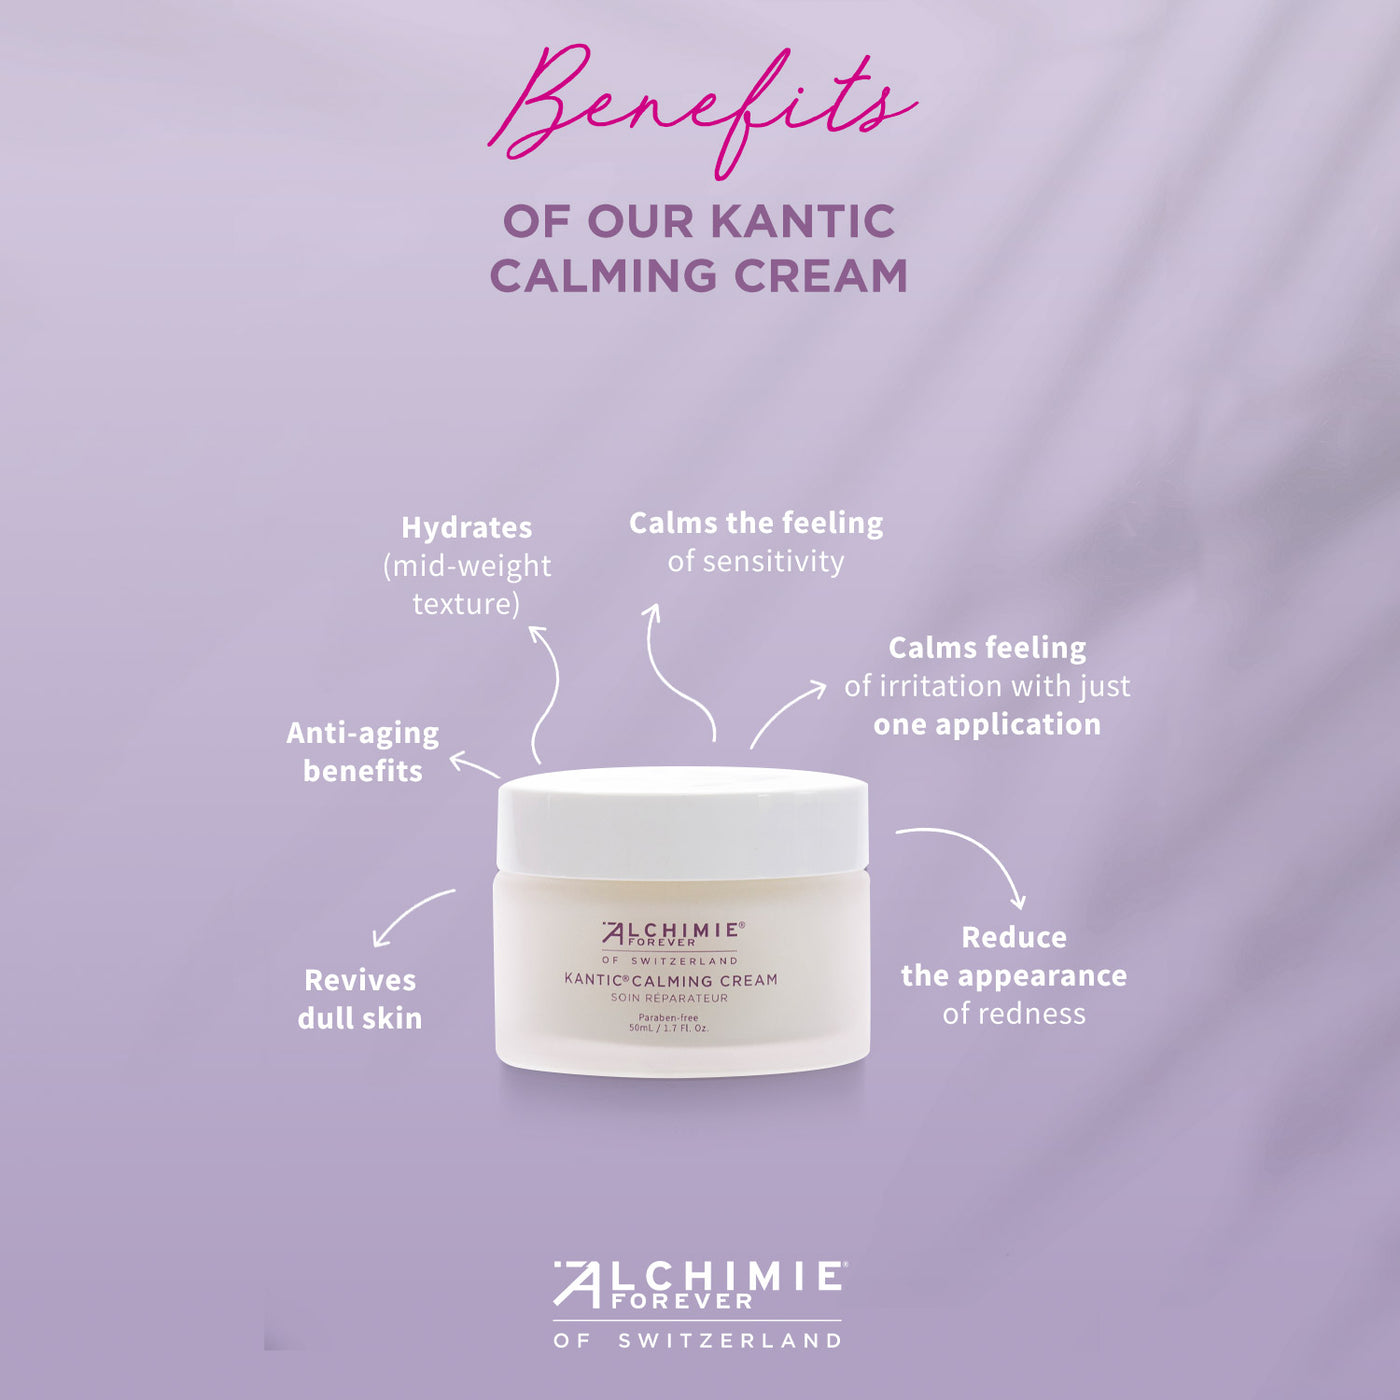 Kantic Calming Cream Benefits.  Hydrates, calms, and revies dull skin while reducing the appearance of redness.